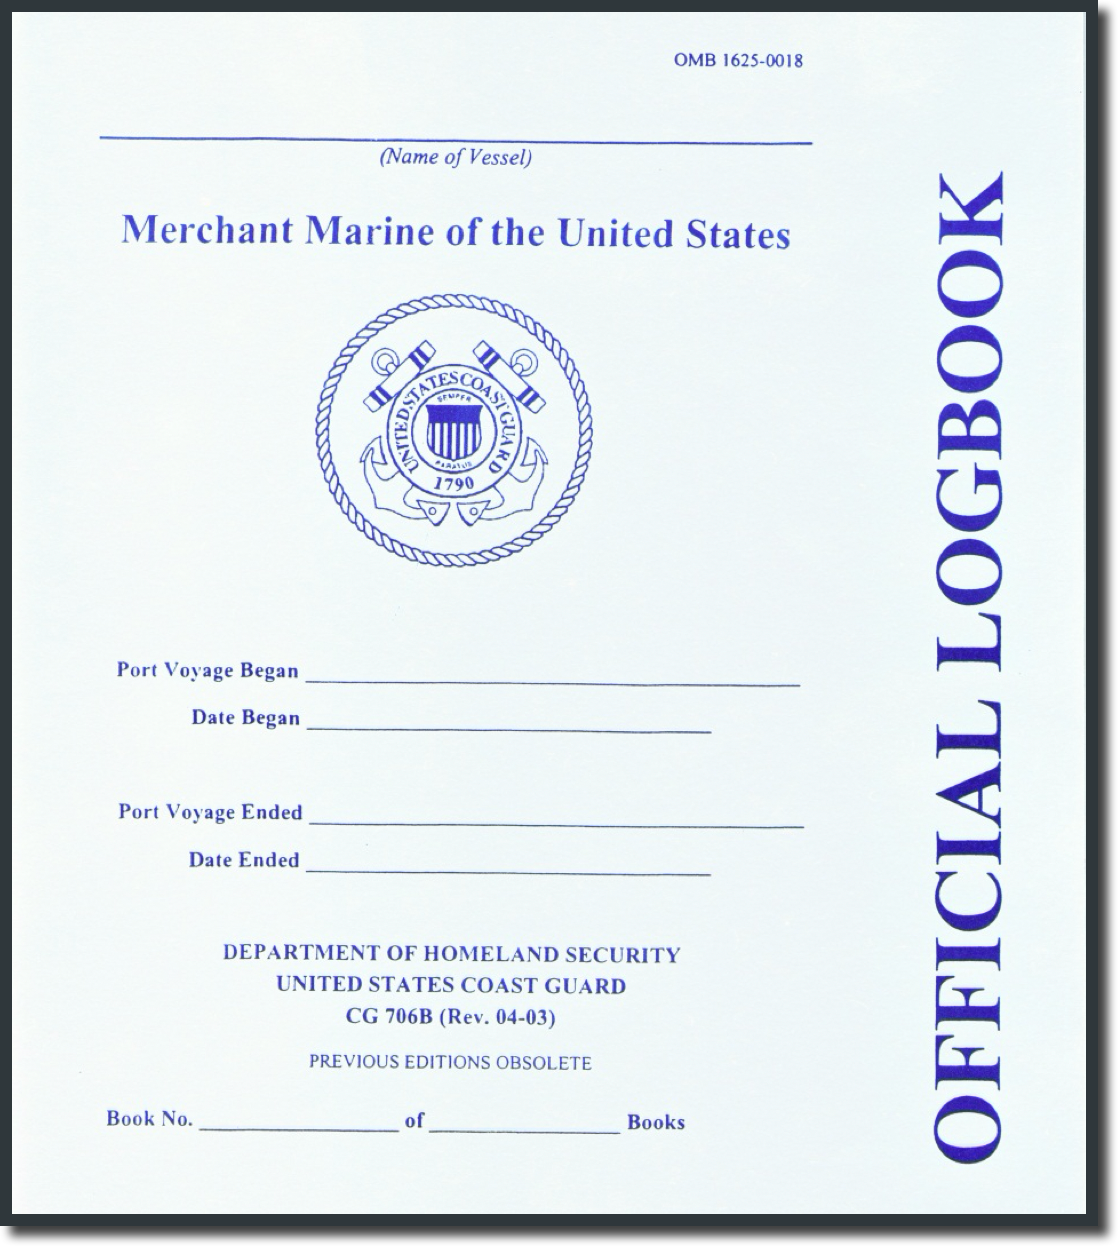 Image of Offical Logbook